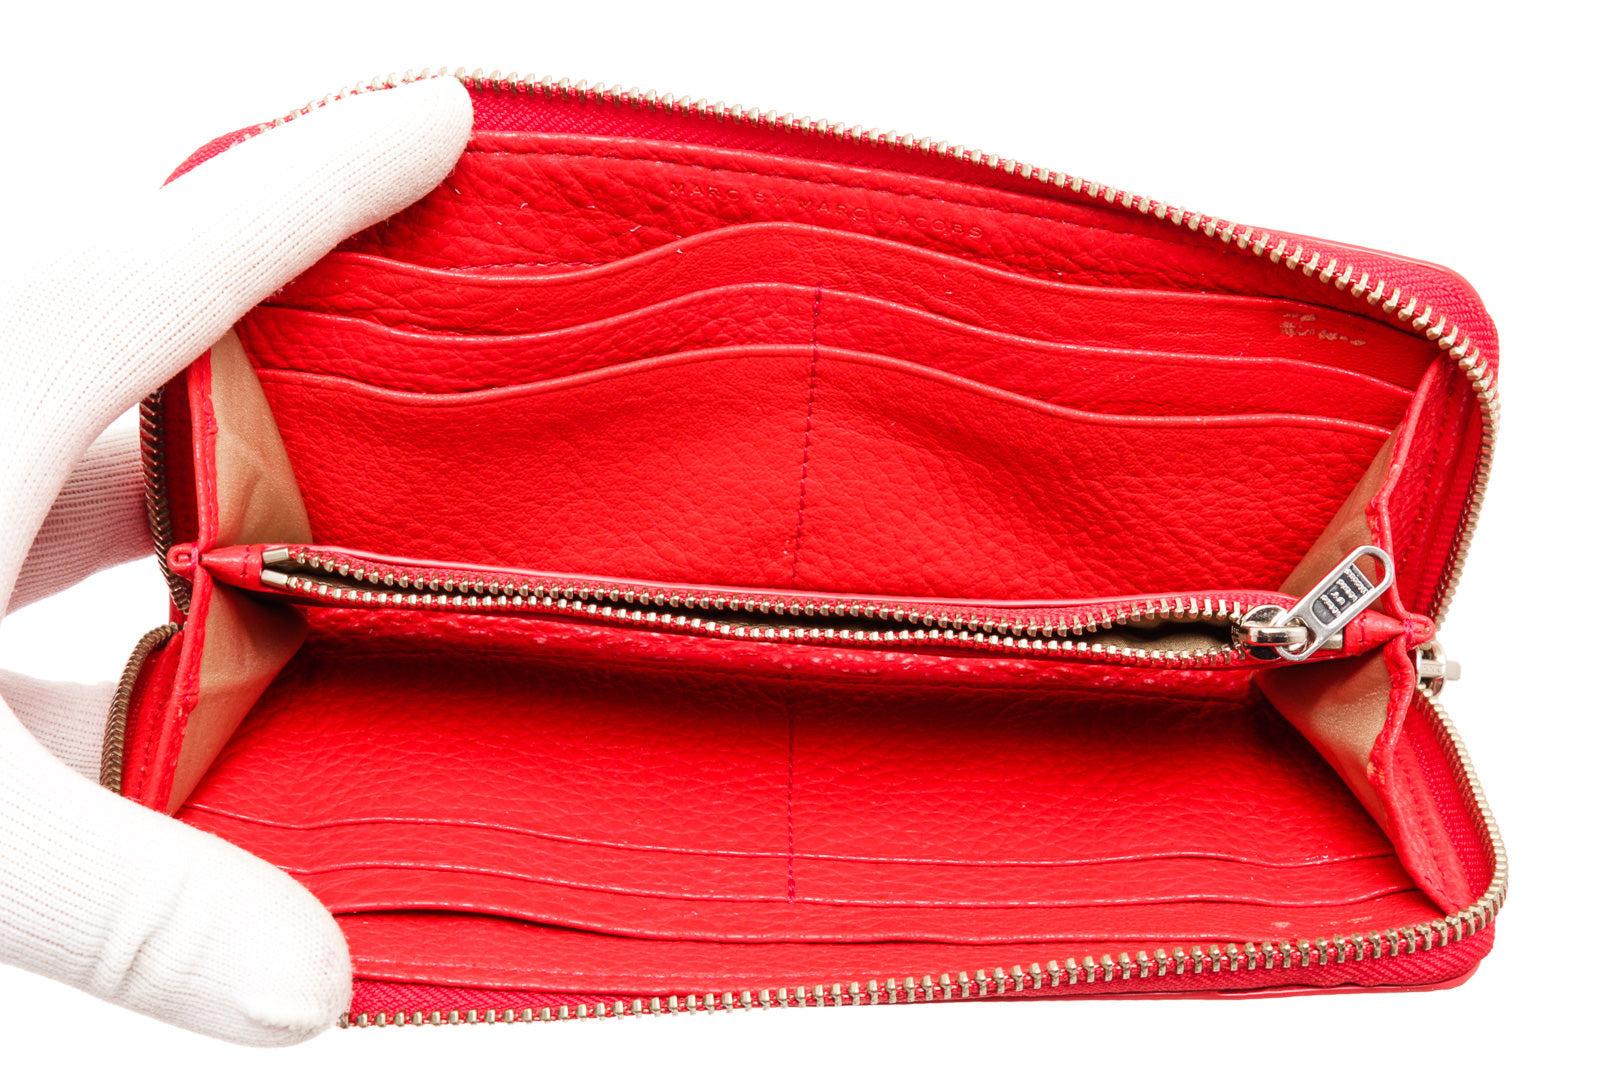 Red Marc By Marc Jacobs red leather zippy wallet with Silver-tone hardware, red